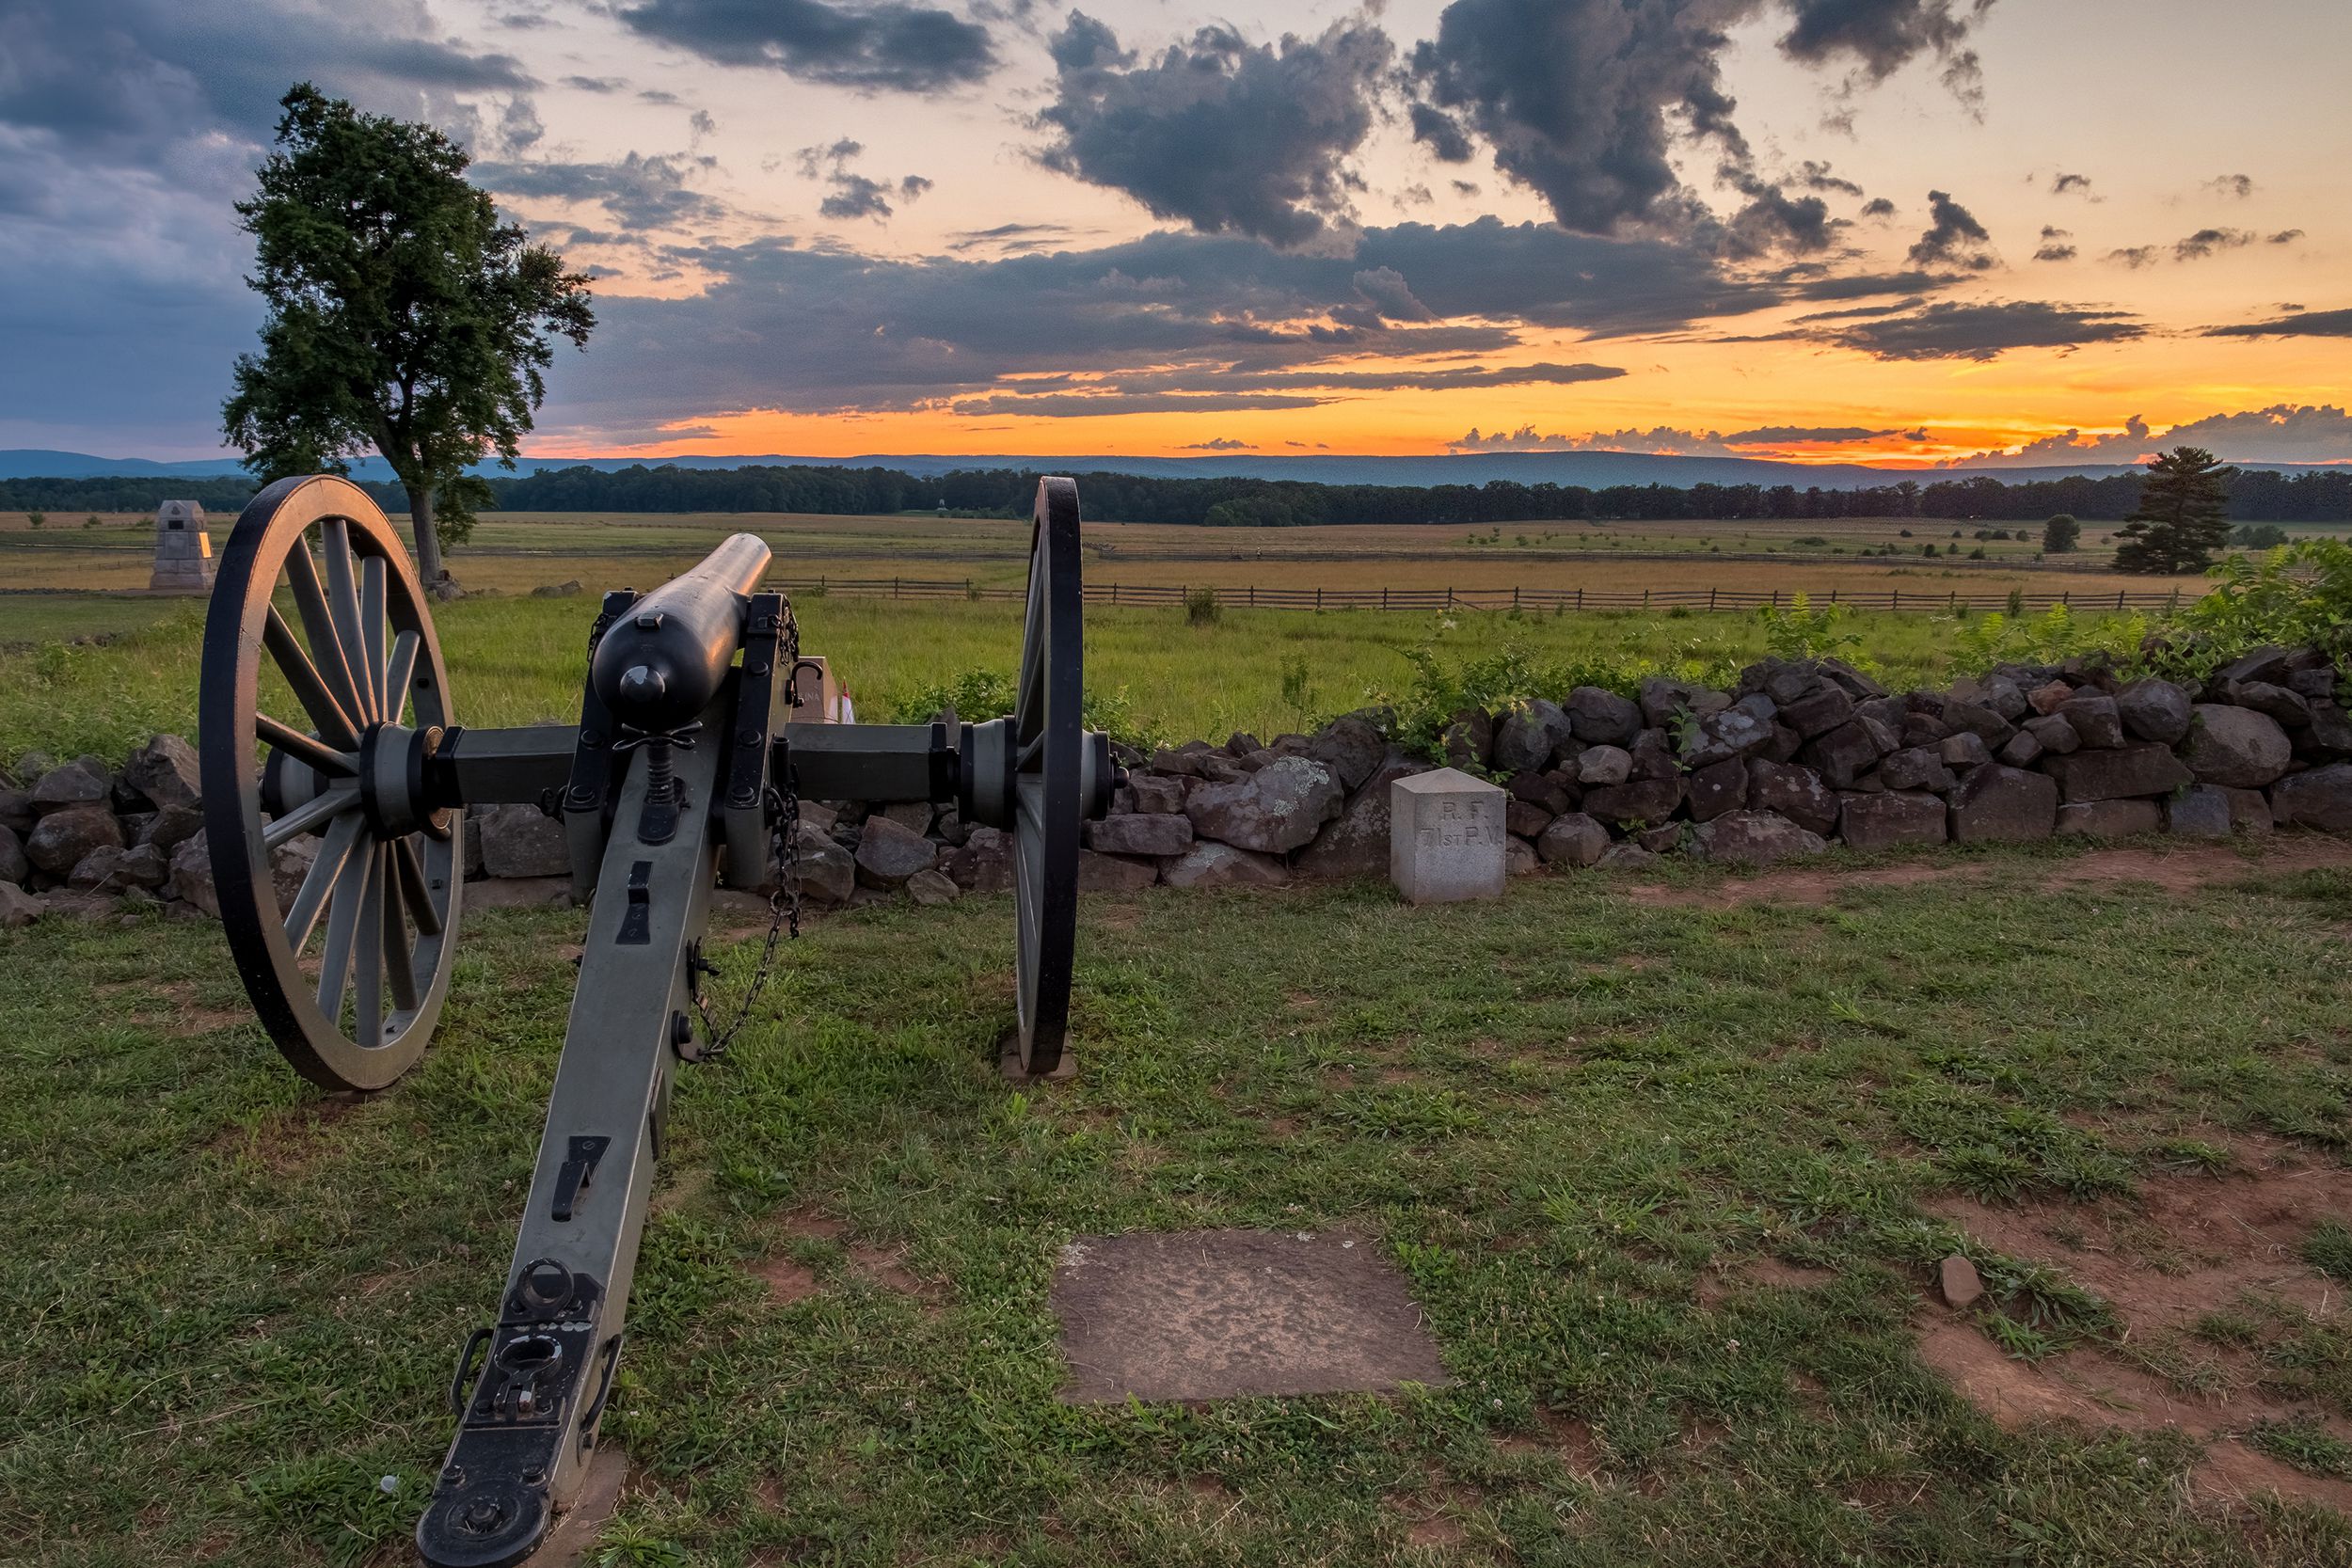 <p>Visit the battlefield and learn about a fraught era in American history at the <a href="https://www.nps.gov/gett/index.htm">Gettysburg National Military Park</a>. The park is free to enter, but admission to the museum is $13.75 for children (ages 6 through 12) and $18.75 for adults. Once inside, you can watch the film "A New Birth of Freedom" narrated by Morgan Freeman and see the Battle of Gettysburg Cyclorama painting.</p>